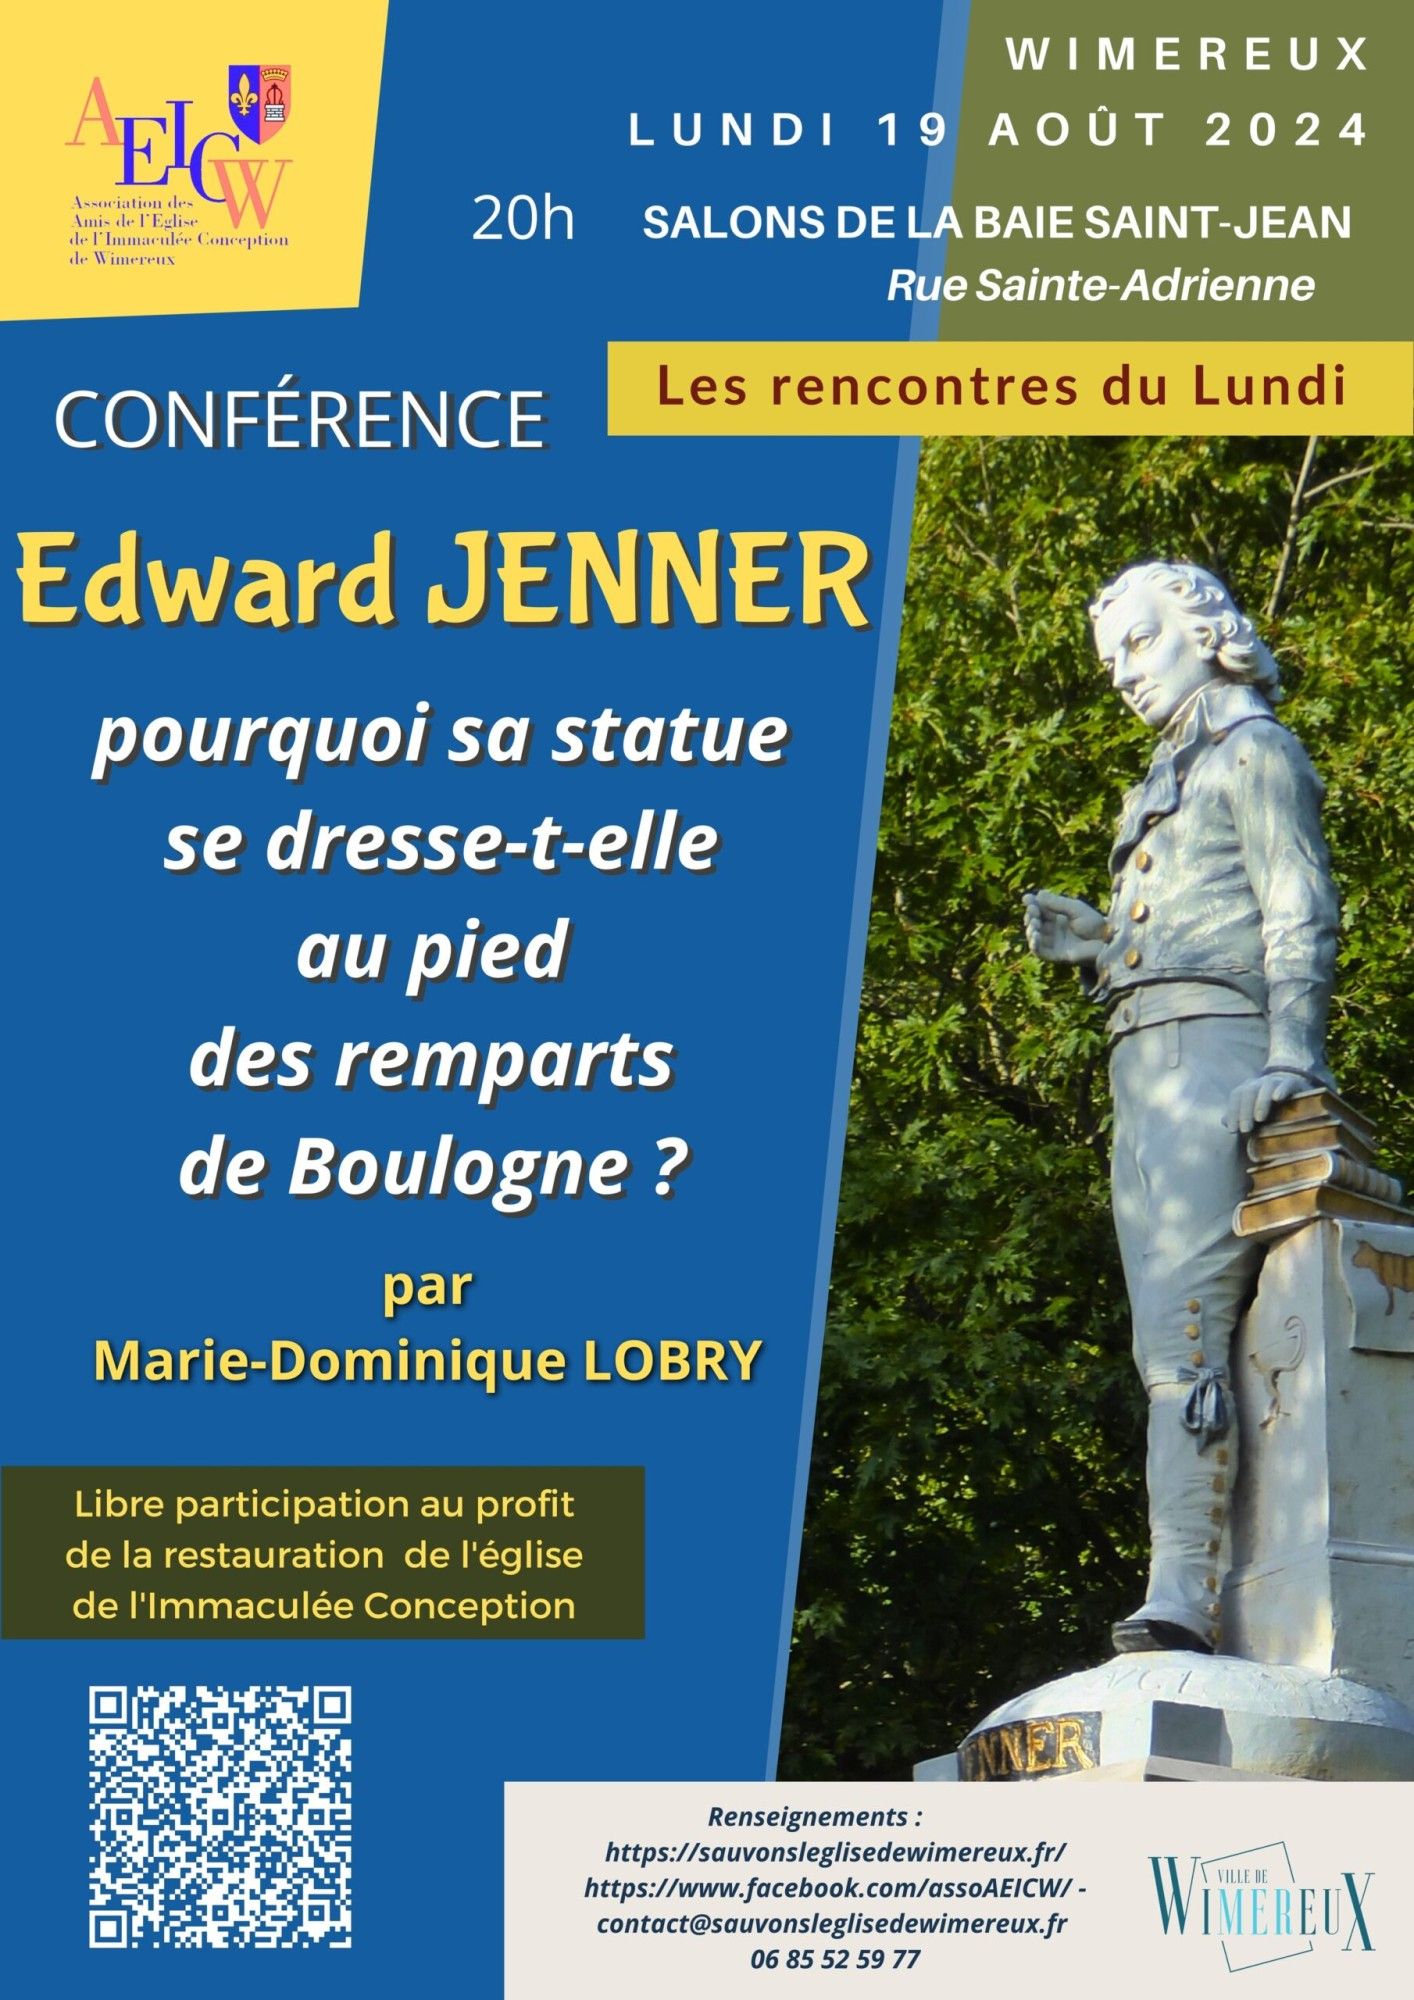 Edward Jenner: why does his statue stand at the foot of the Boulogne ramparts?